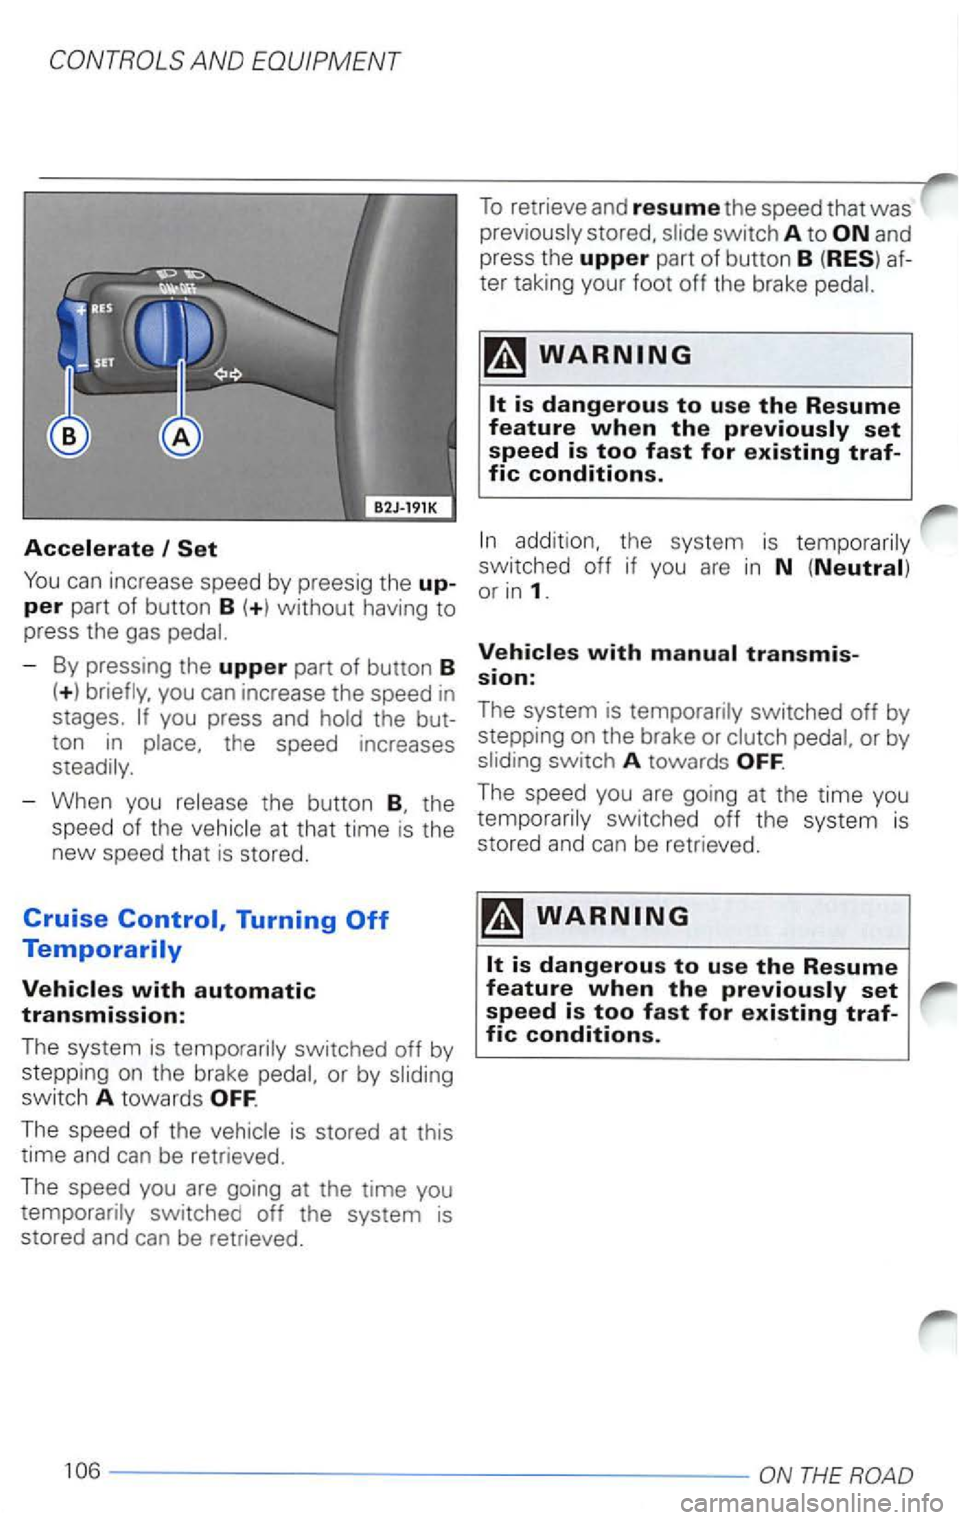 VOLKSWAGEN PASSAT 1998  Owners Manual and 
press  the upper part of button B (RES) af­
ter  taking  your foot 
off the brake 
switched  off if you are in N  (Neutral) can increase  speed by preesig the up-or in 1. per part  of button B (